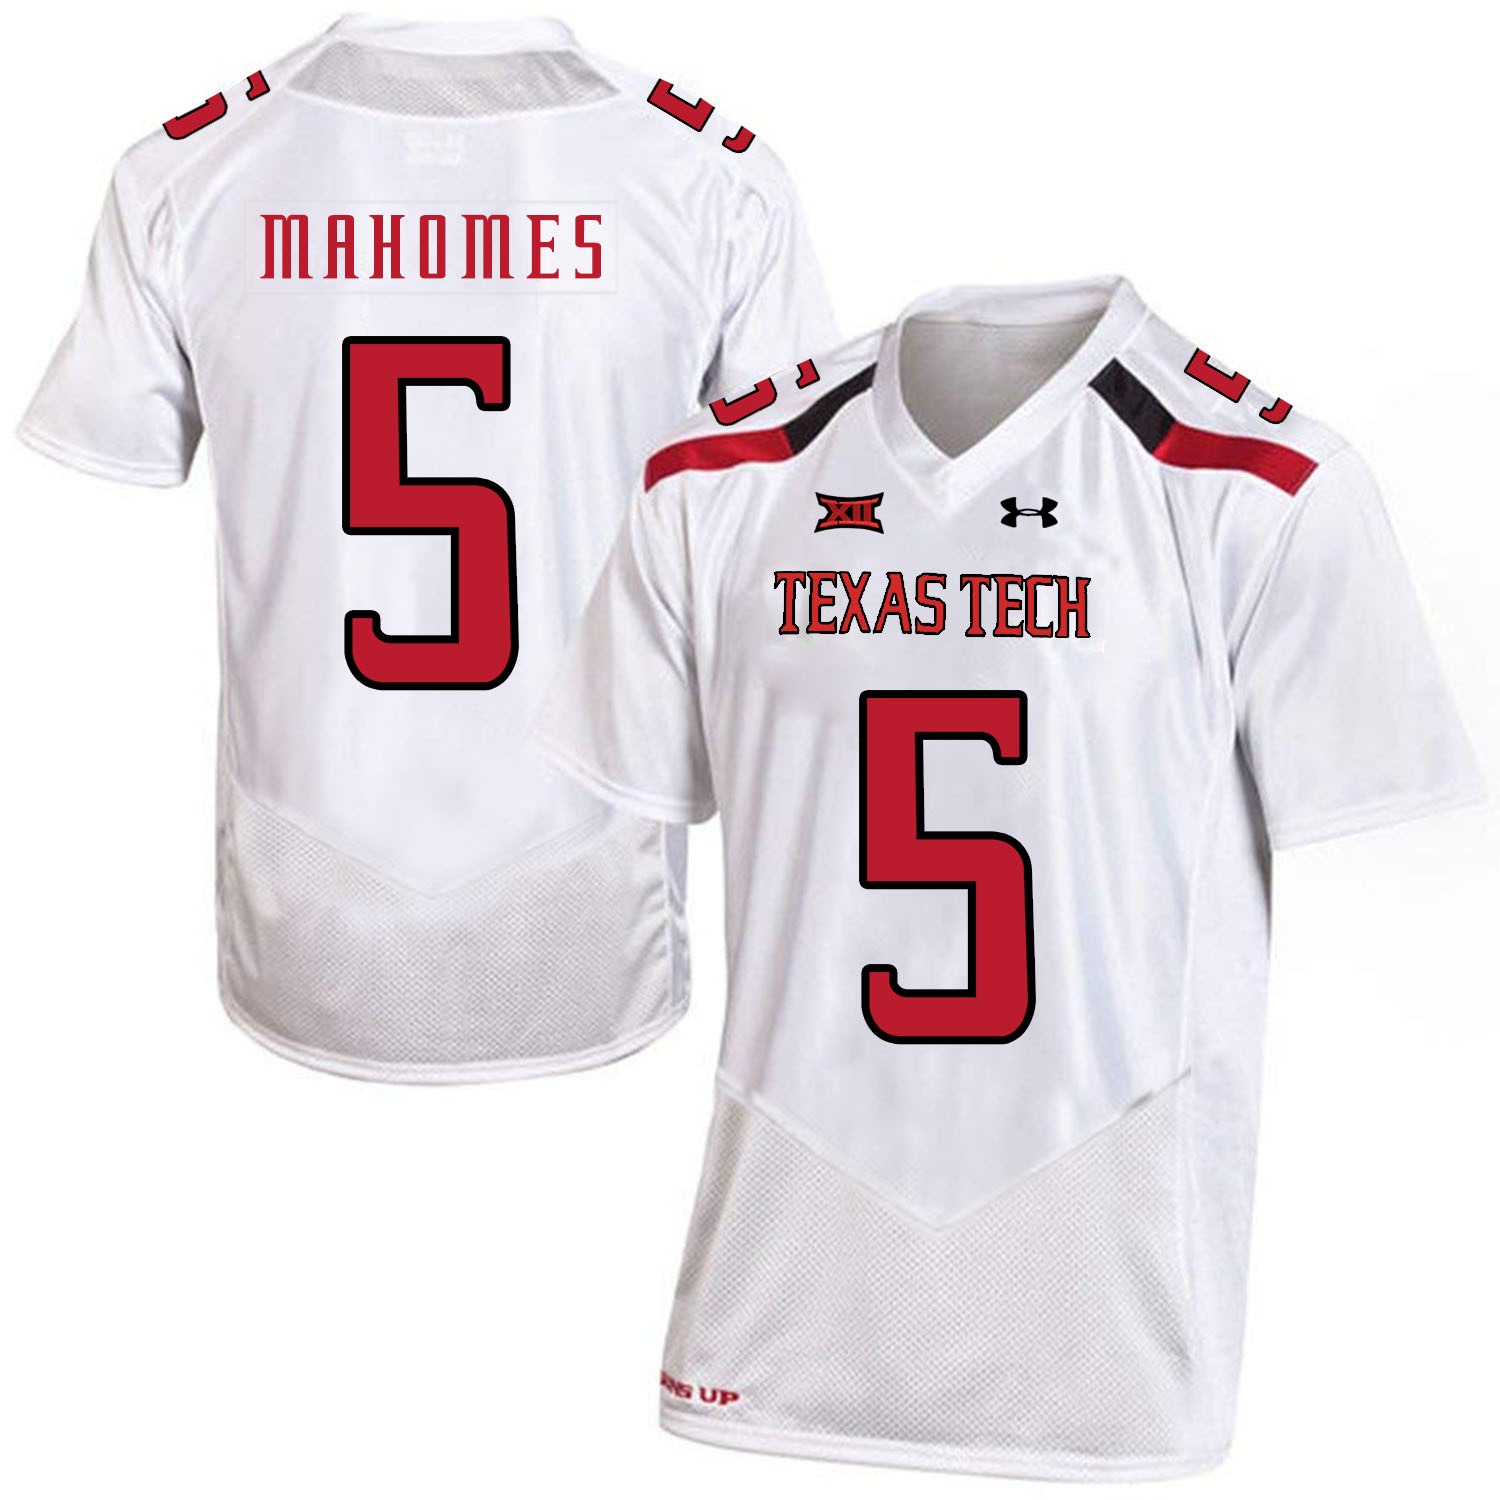 Texas Tech Red Raiders 5 Patrick Mahomes White College Football Jersey